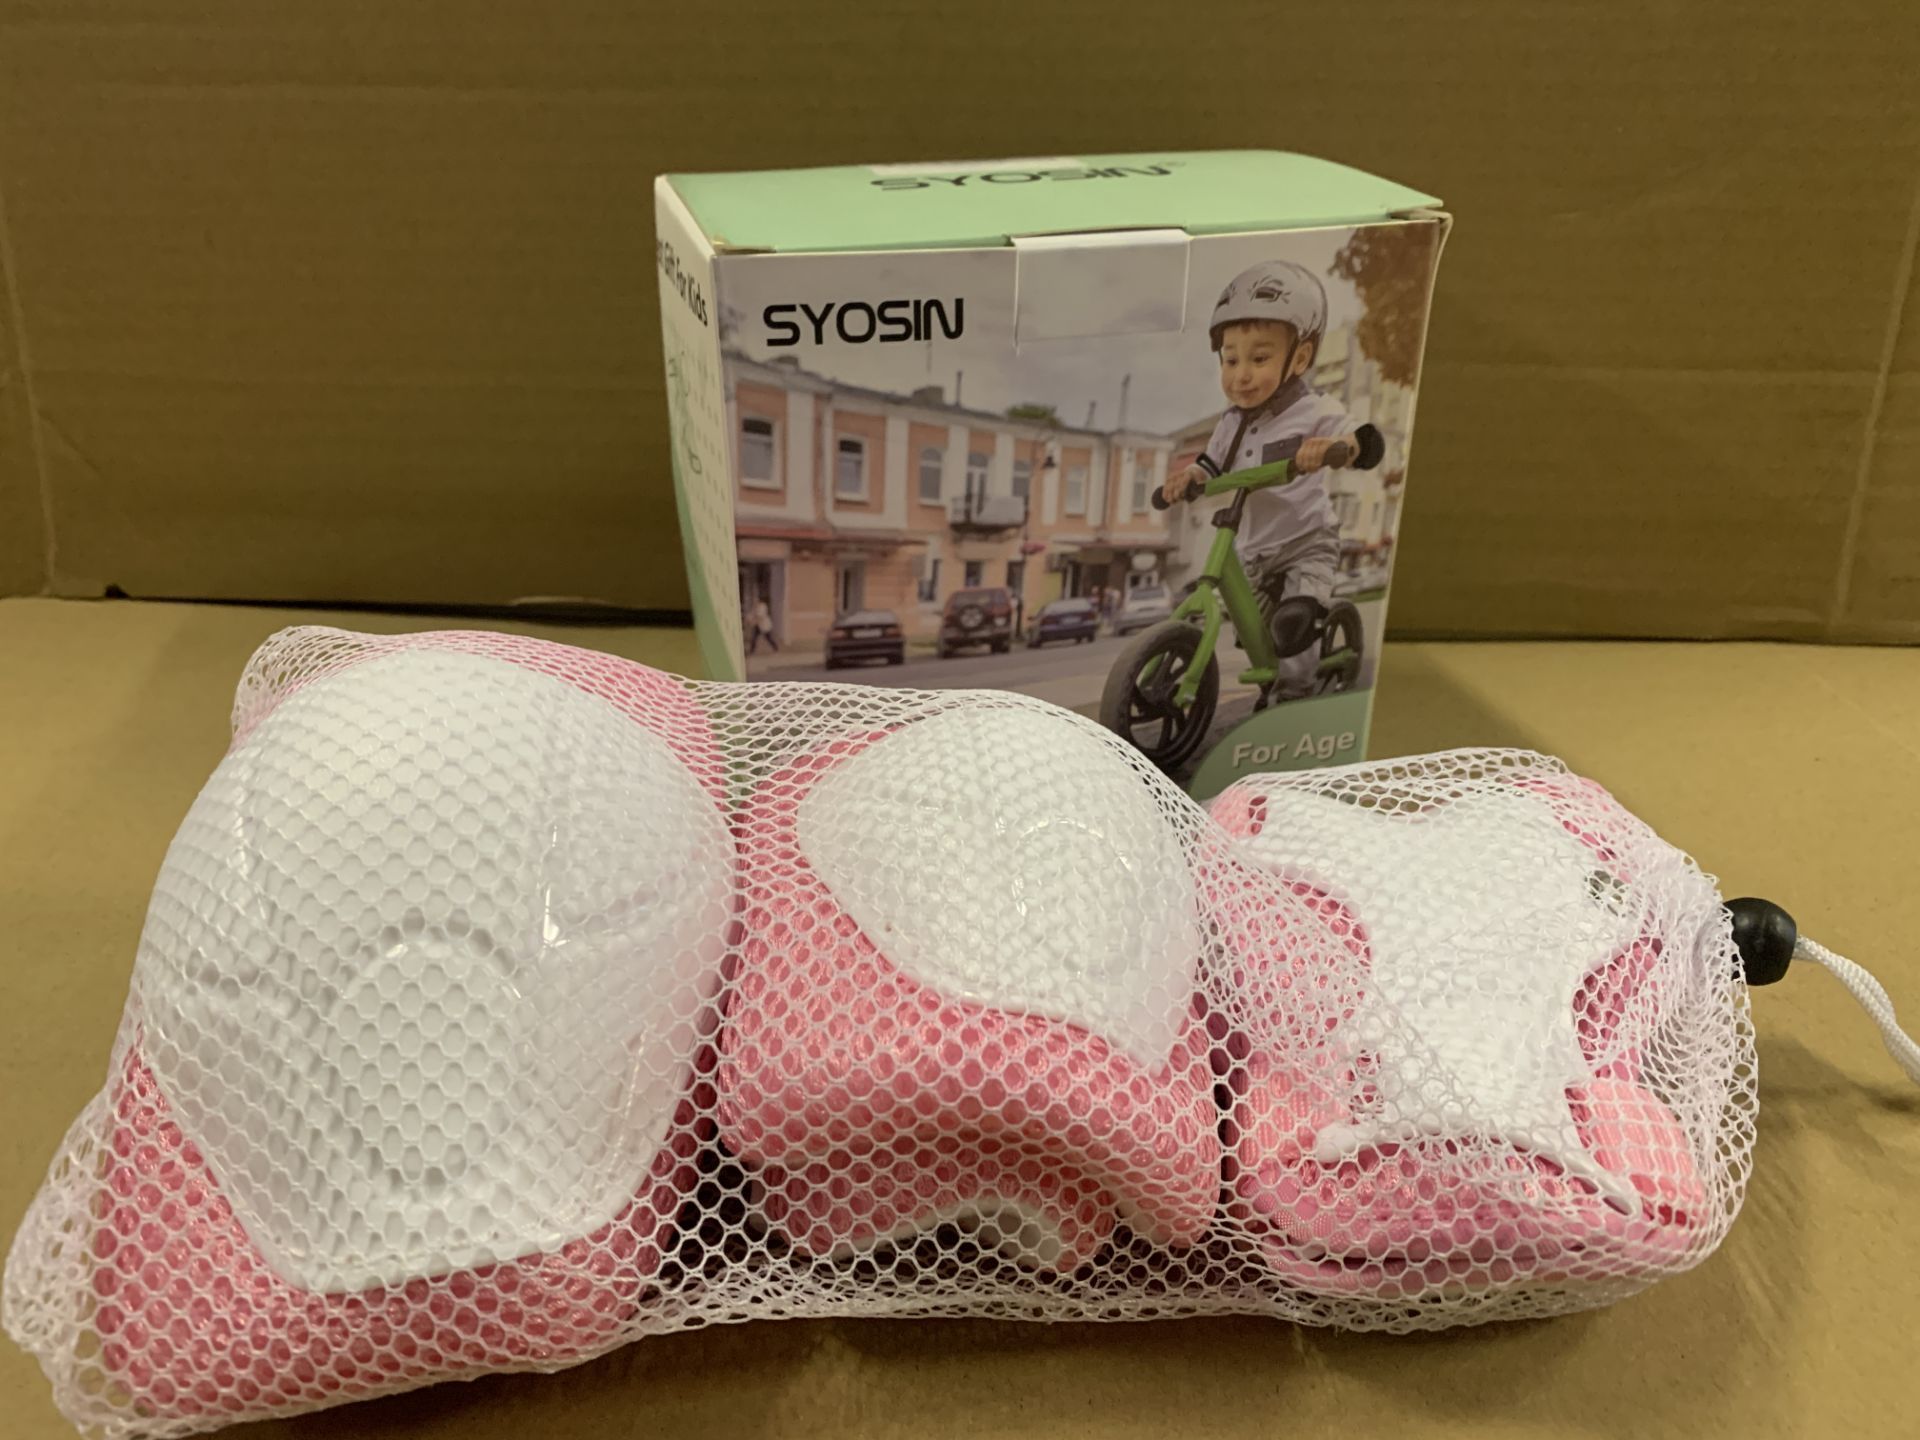 22 X BRAND NEW CYCLING STUFF SYOSIN PROTECTIVE GEAR SETS FOR AGE 3-9 INCLUDING WRIST, ELBOW AND KNEE